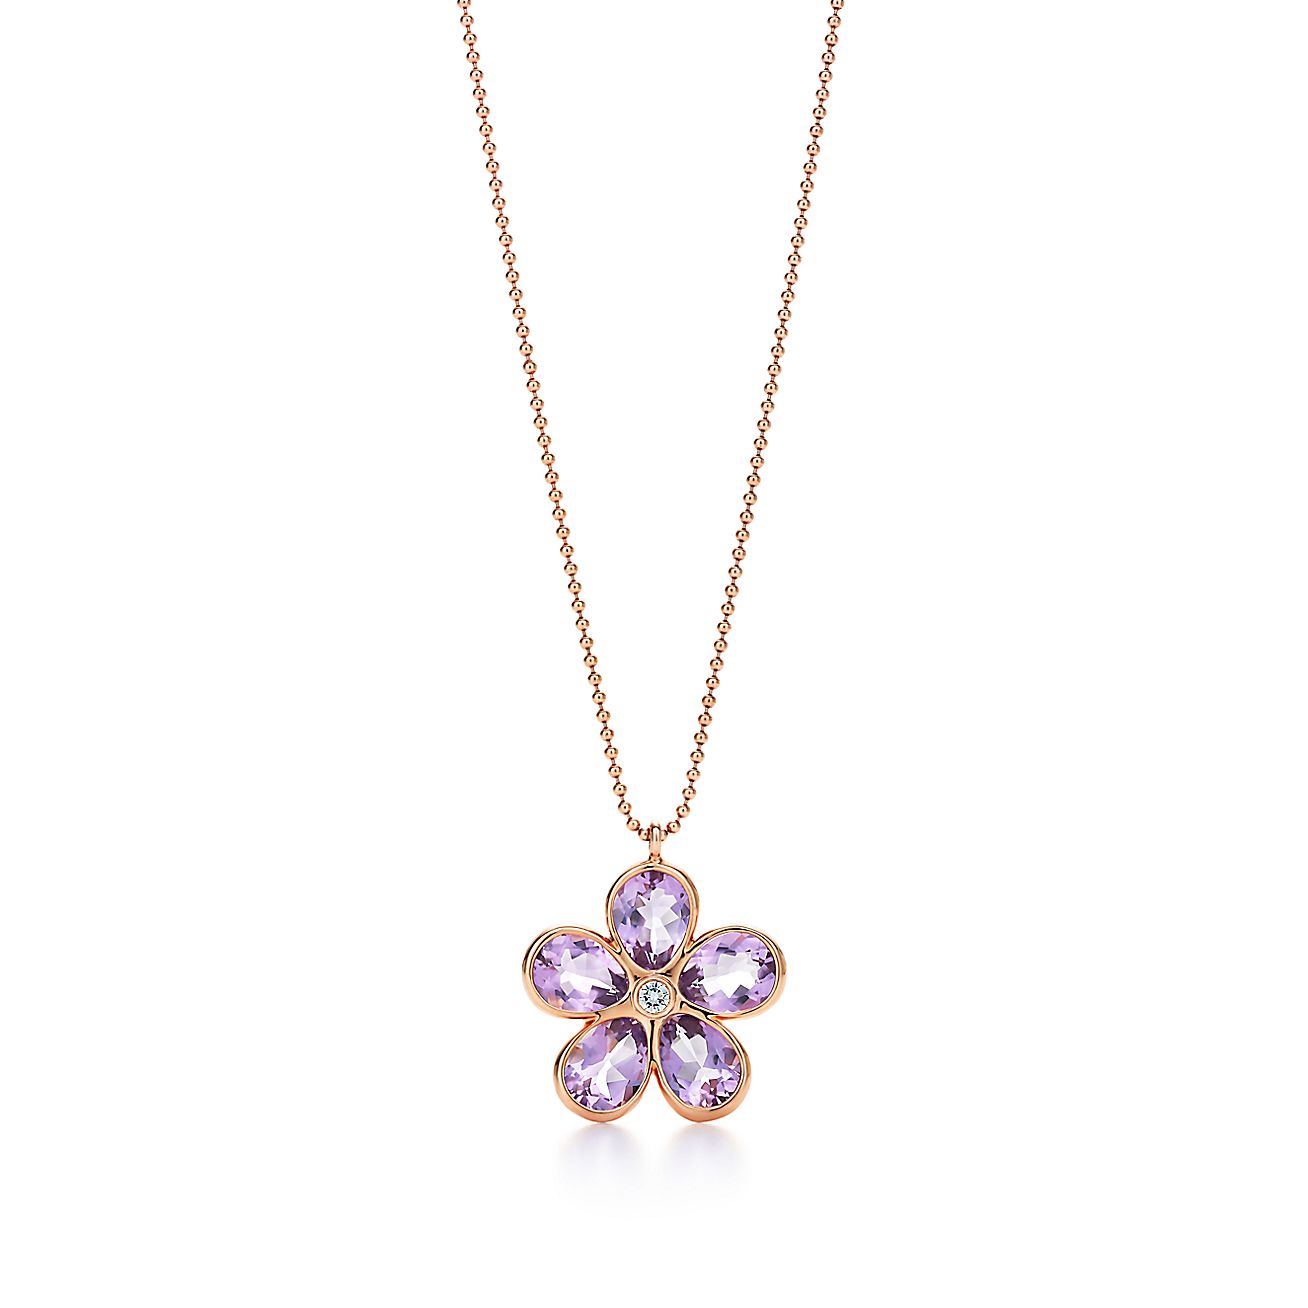 Tiffany Sparklers flower pendant in 18k rose gold with amethysts and a ...